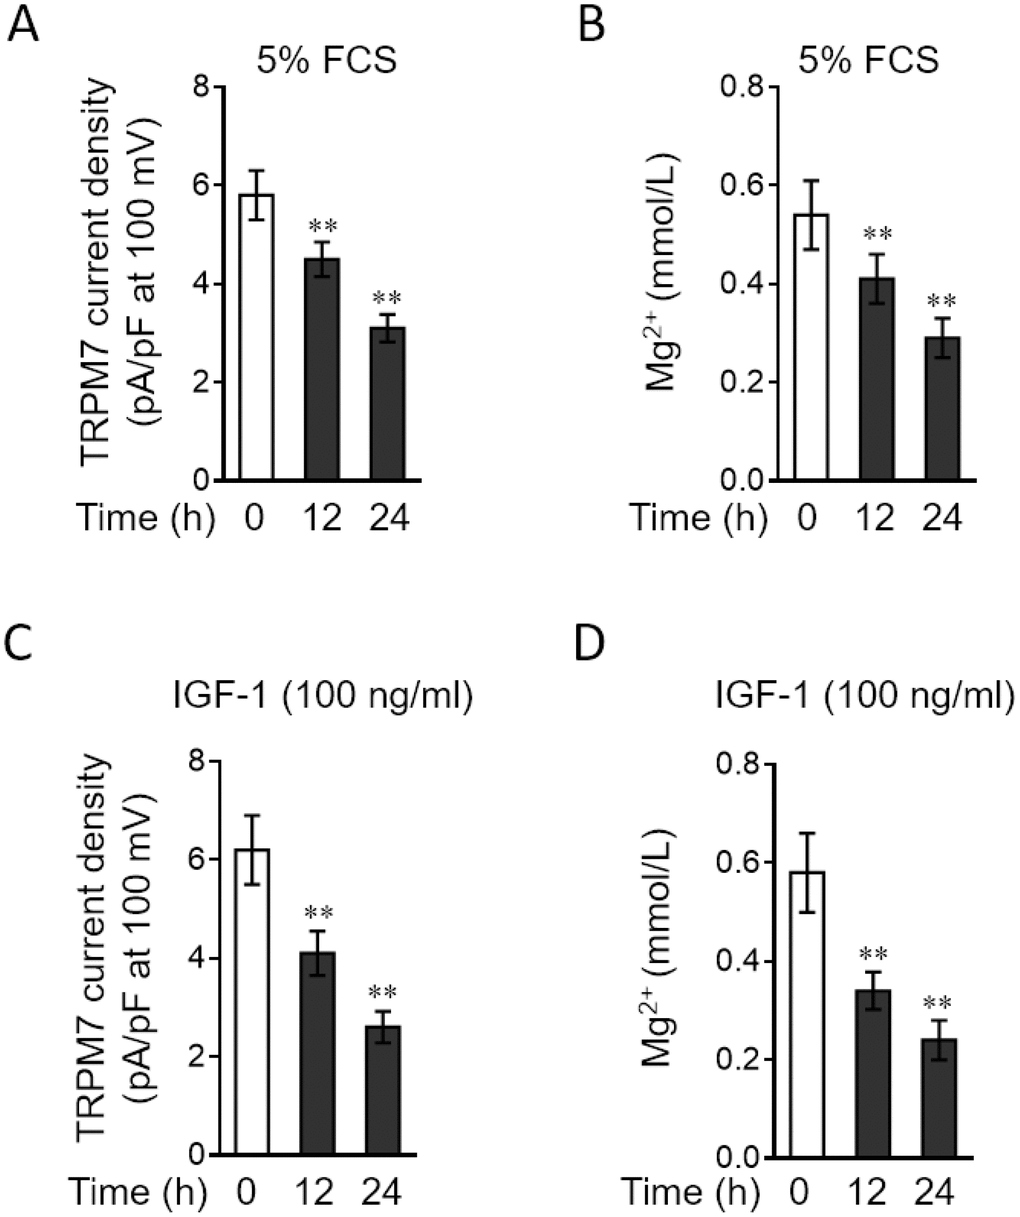 PAH stimuli reduce TRPM7 currents and intracellular free Mg2 concentration in PASMCs in vitro. (A–B) PASMCs from rats were serum starved for 24 h, followed by incubation with medium alone (control) or containing 5% fetal calf serum (FCS) for 12 or 24 h. (A) TRPM7 currents were recorded using the whole-cell patch-clamp technology with ramp from -100 mV to 100 mV. The TRPM7 currents density (pA/pF) with ramp at 100 mV is shown. Fifty cells were analyzed in each treatment. Data are mean ± SD. One-way ANOVA test. **, P B) Intracellular free Mg2+ concentration was determined. Data are mean ± SD from 3 independent experiments. One-way ANOVA test. **, P C–D) PASMCs from rats were serum starved for 24 h, followed by incubation with medium alone (control) or containing 100 ng/ml IGF-1 for 12 or 24 h. The TRPM7 currents density (C) and intracellular free Mg2+ concentration (D) were determined and analyzed as in (A–B).